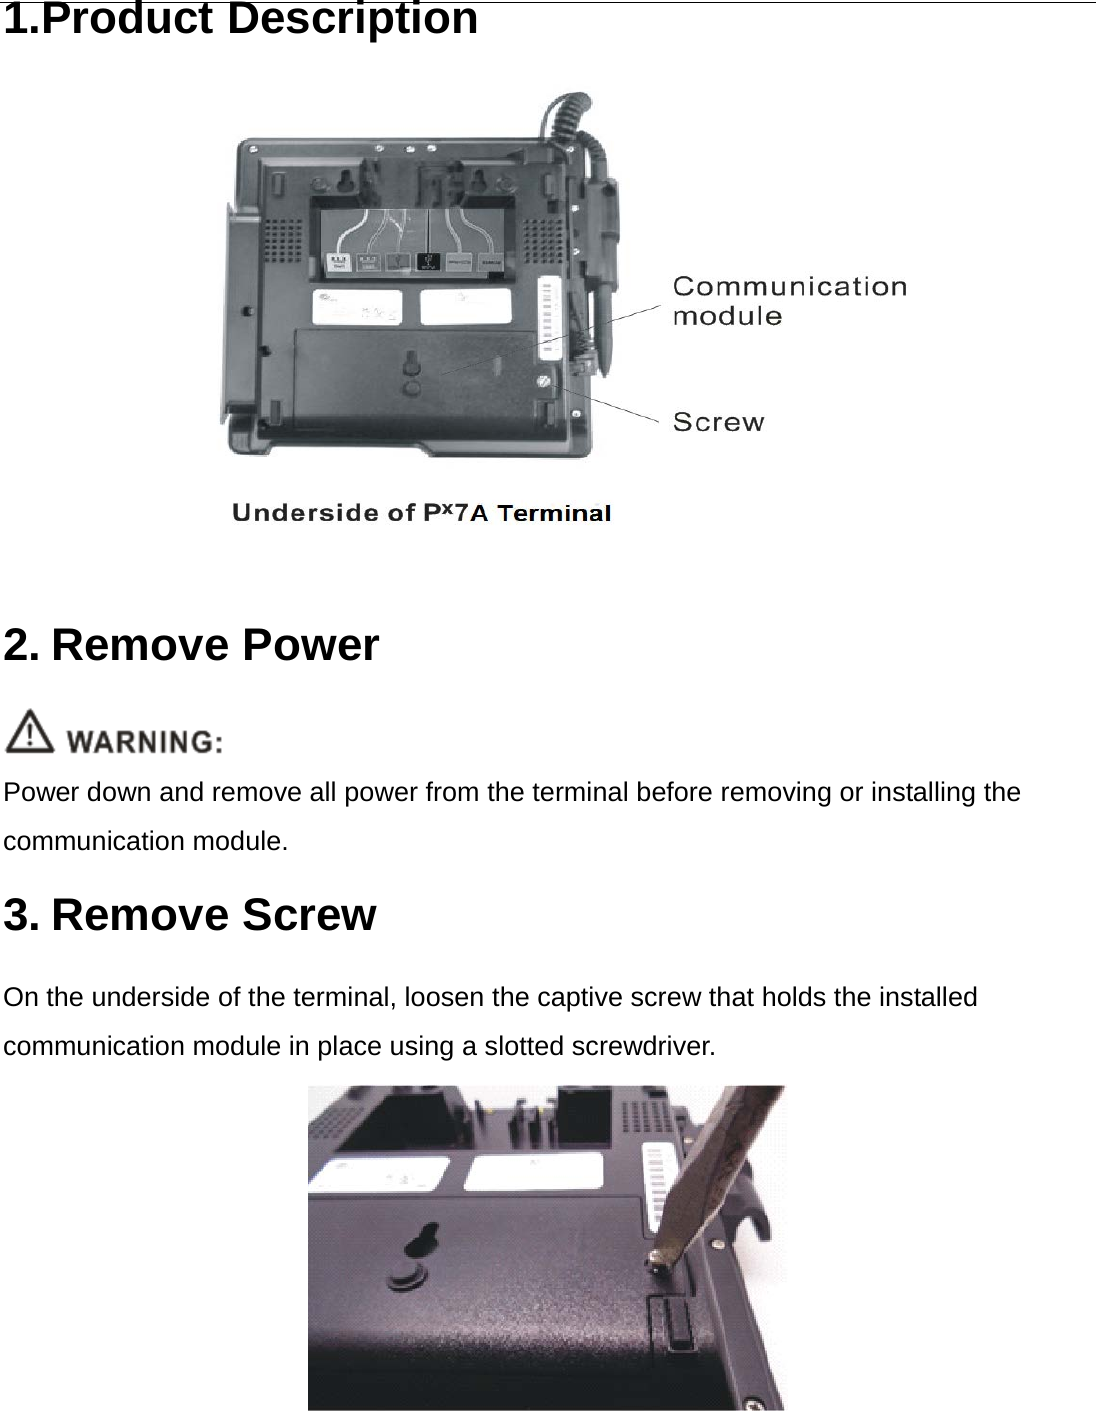  1.Product Description      2. Remove Power  Power down and remove all power from the terminal before removing or installing the communication module. 3. Remove Screw On the underside of the terminal, loosen the captive screw that holds the installed communication module in place using a slotted screwdriver.  